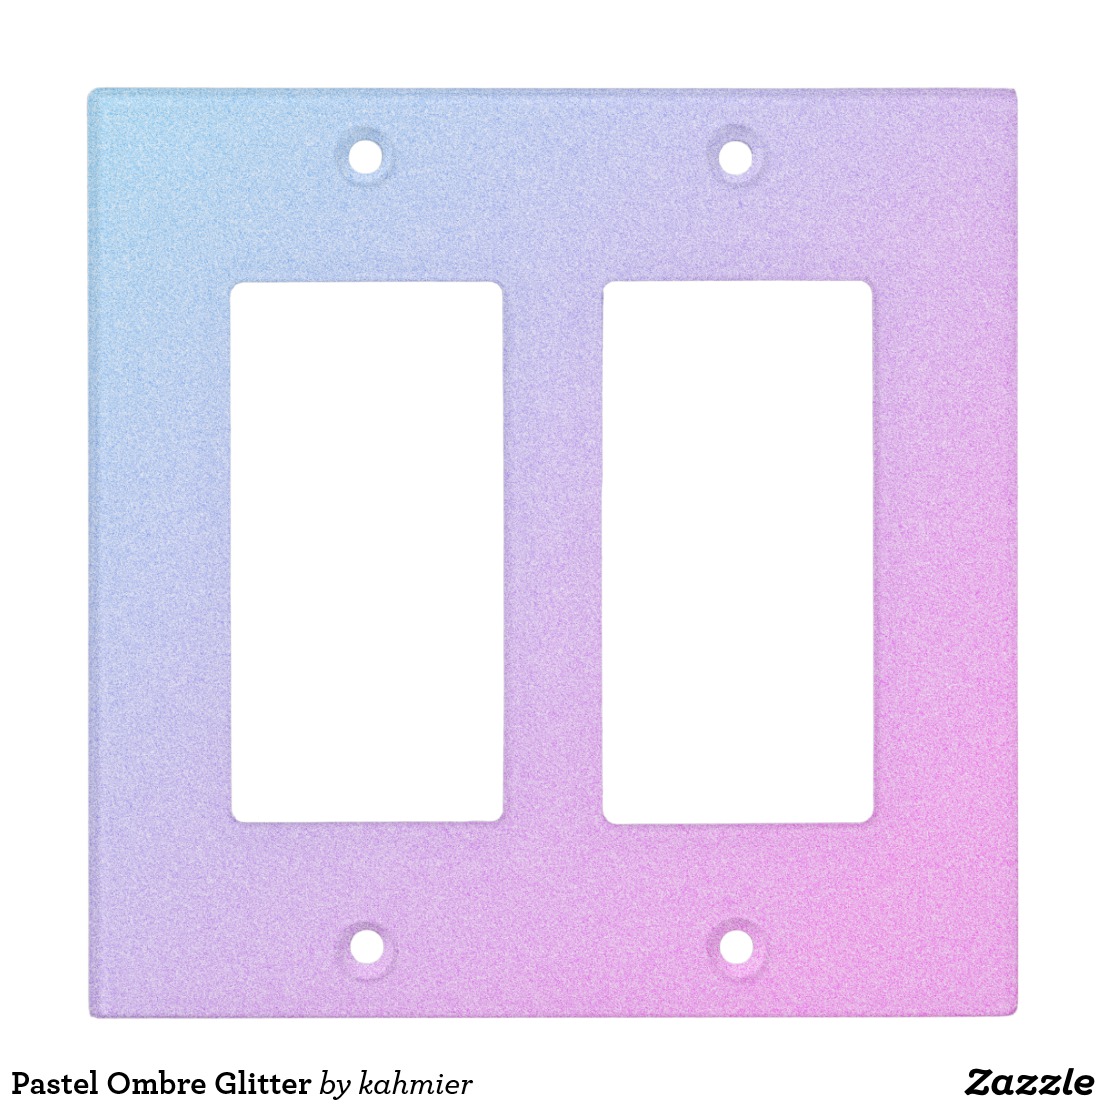 Pastel Ombre Glitter Light Switch Cover